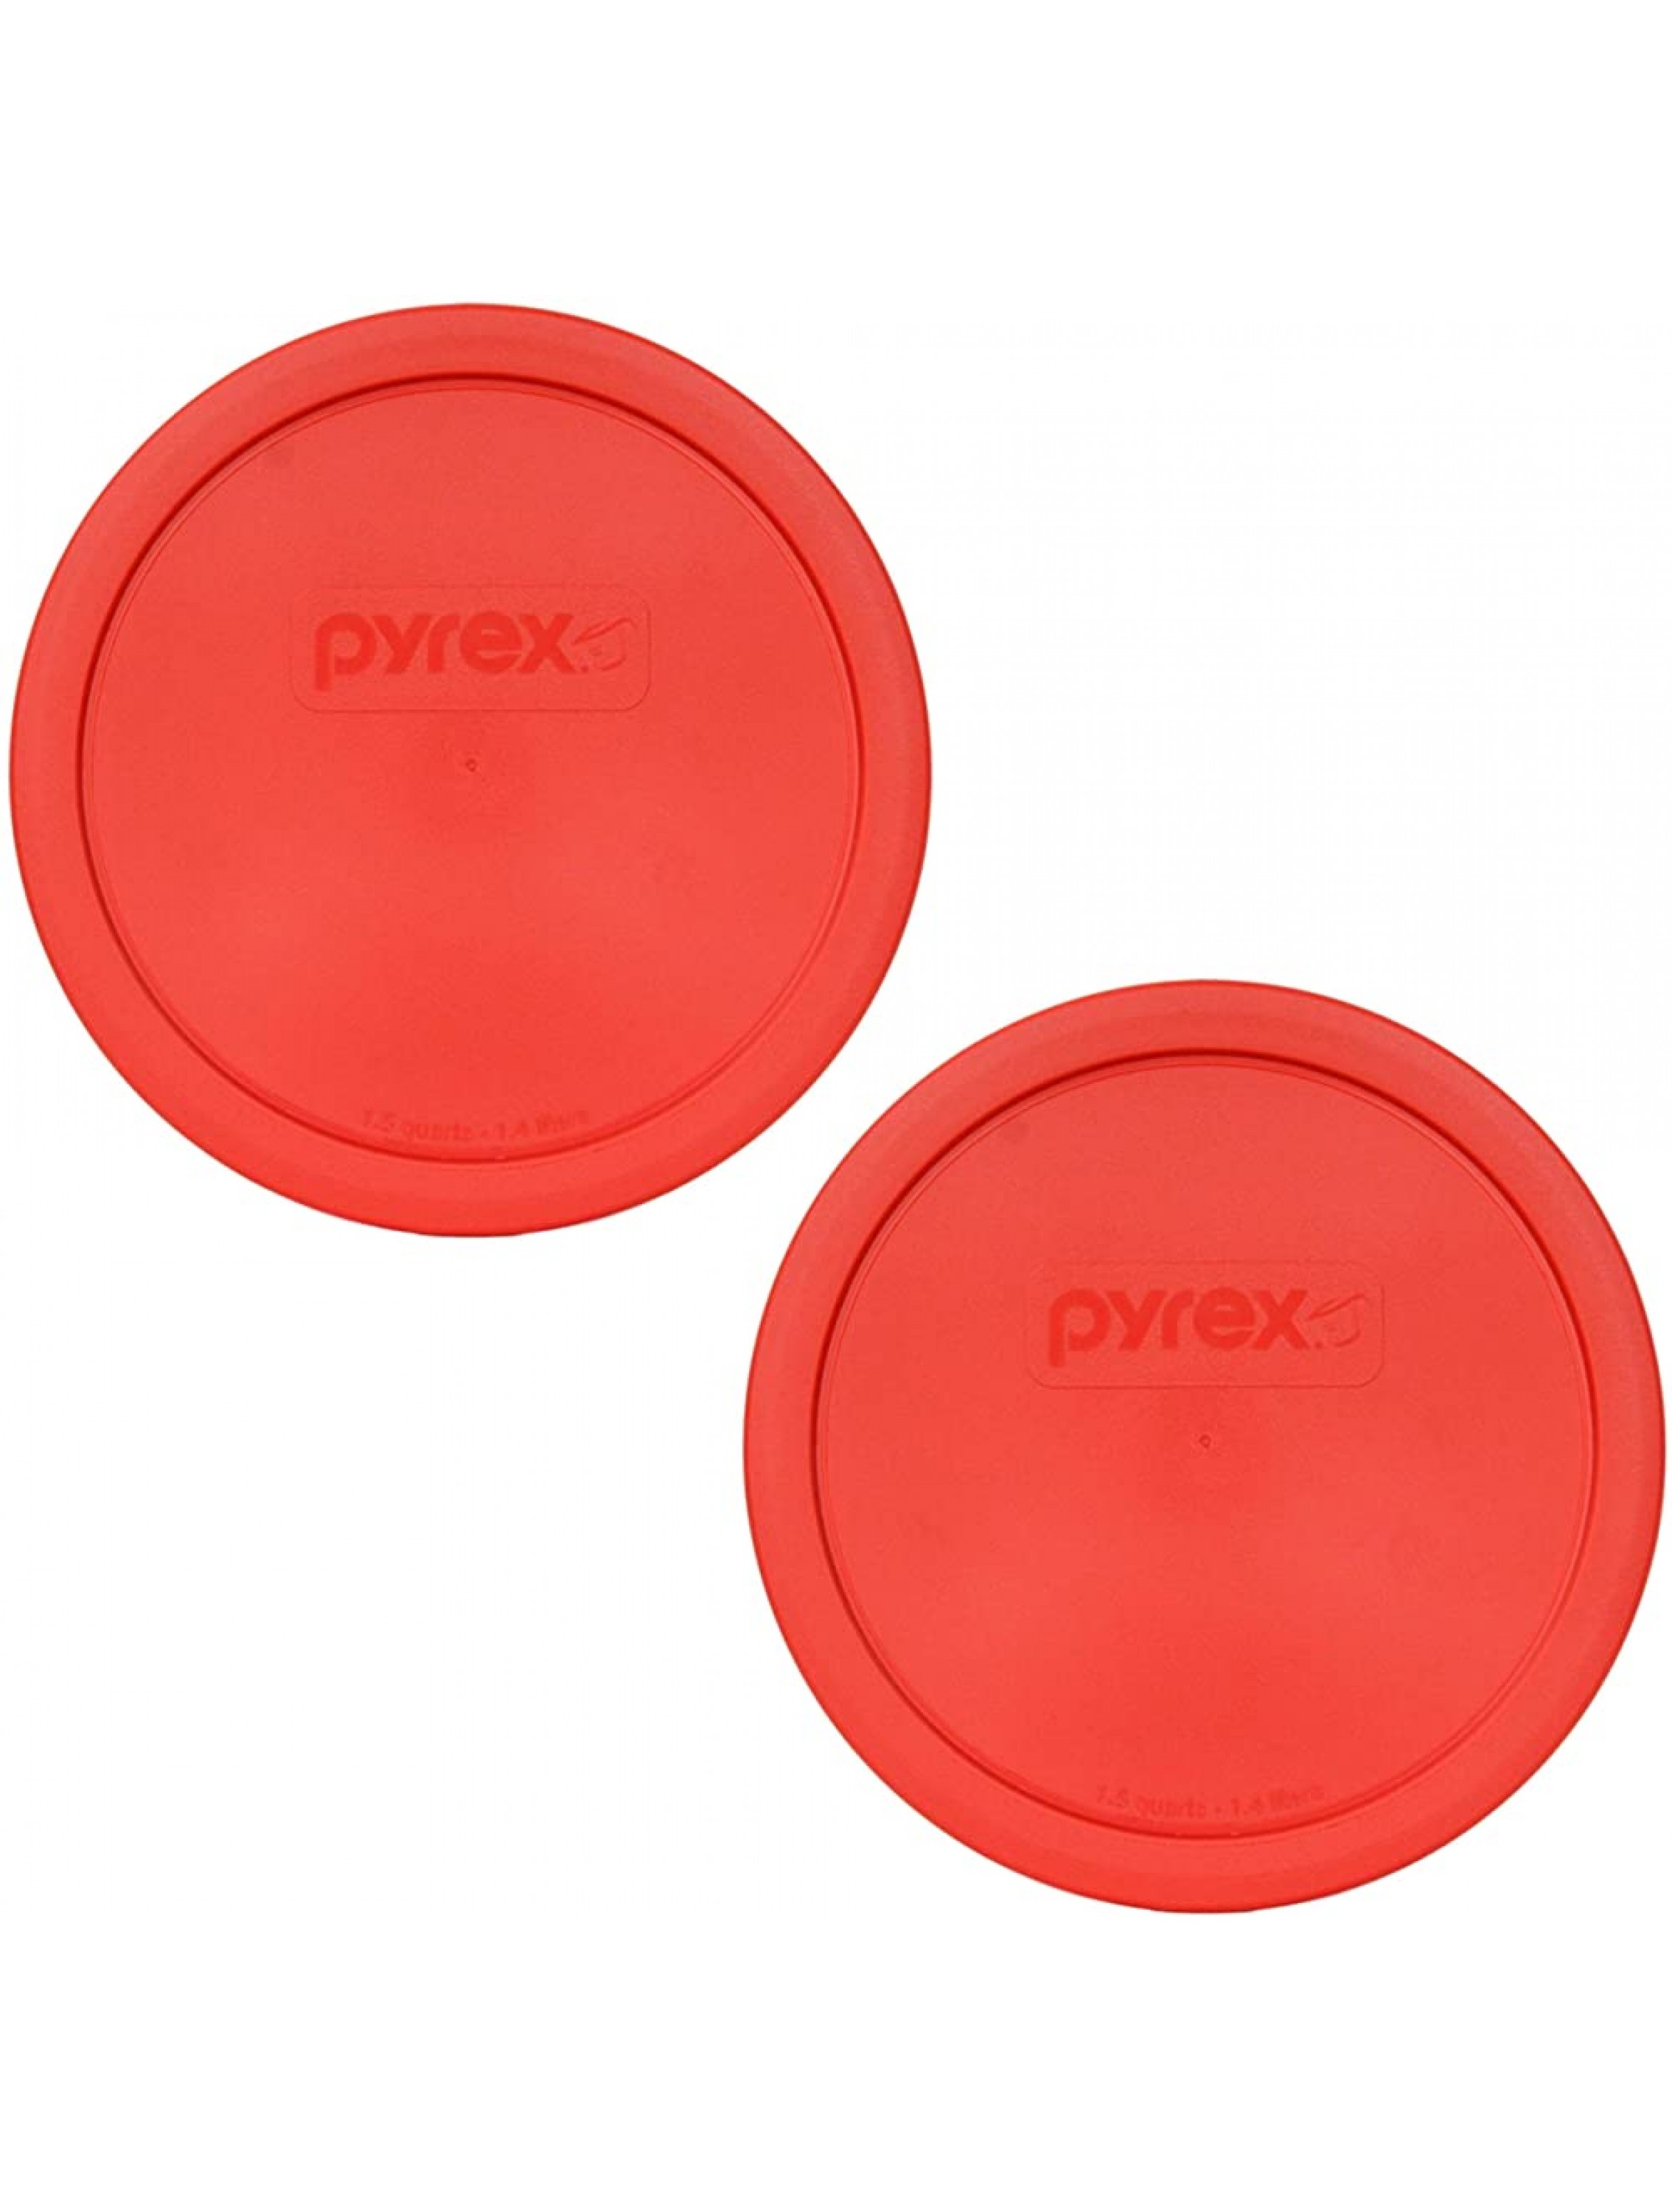 Pyrex 323-PC 1.5qt Red Round Plastic Mixing Bowl Lid 2 Pack Lid Only Containers Not Included - BUH0SLQ4I